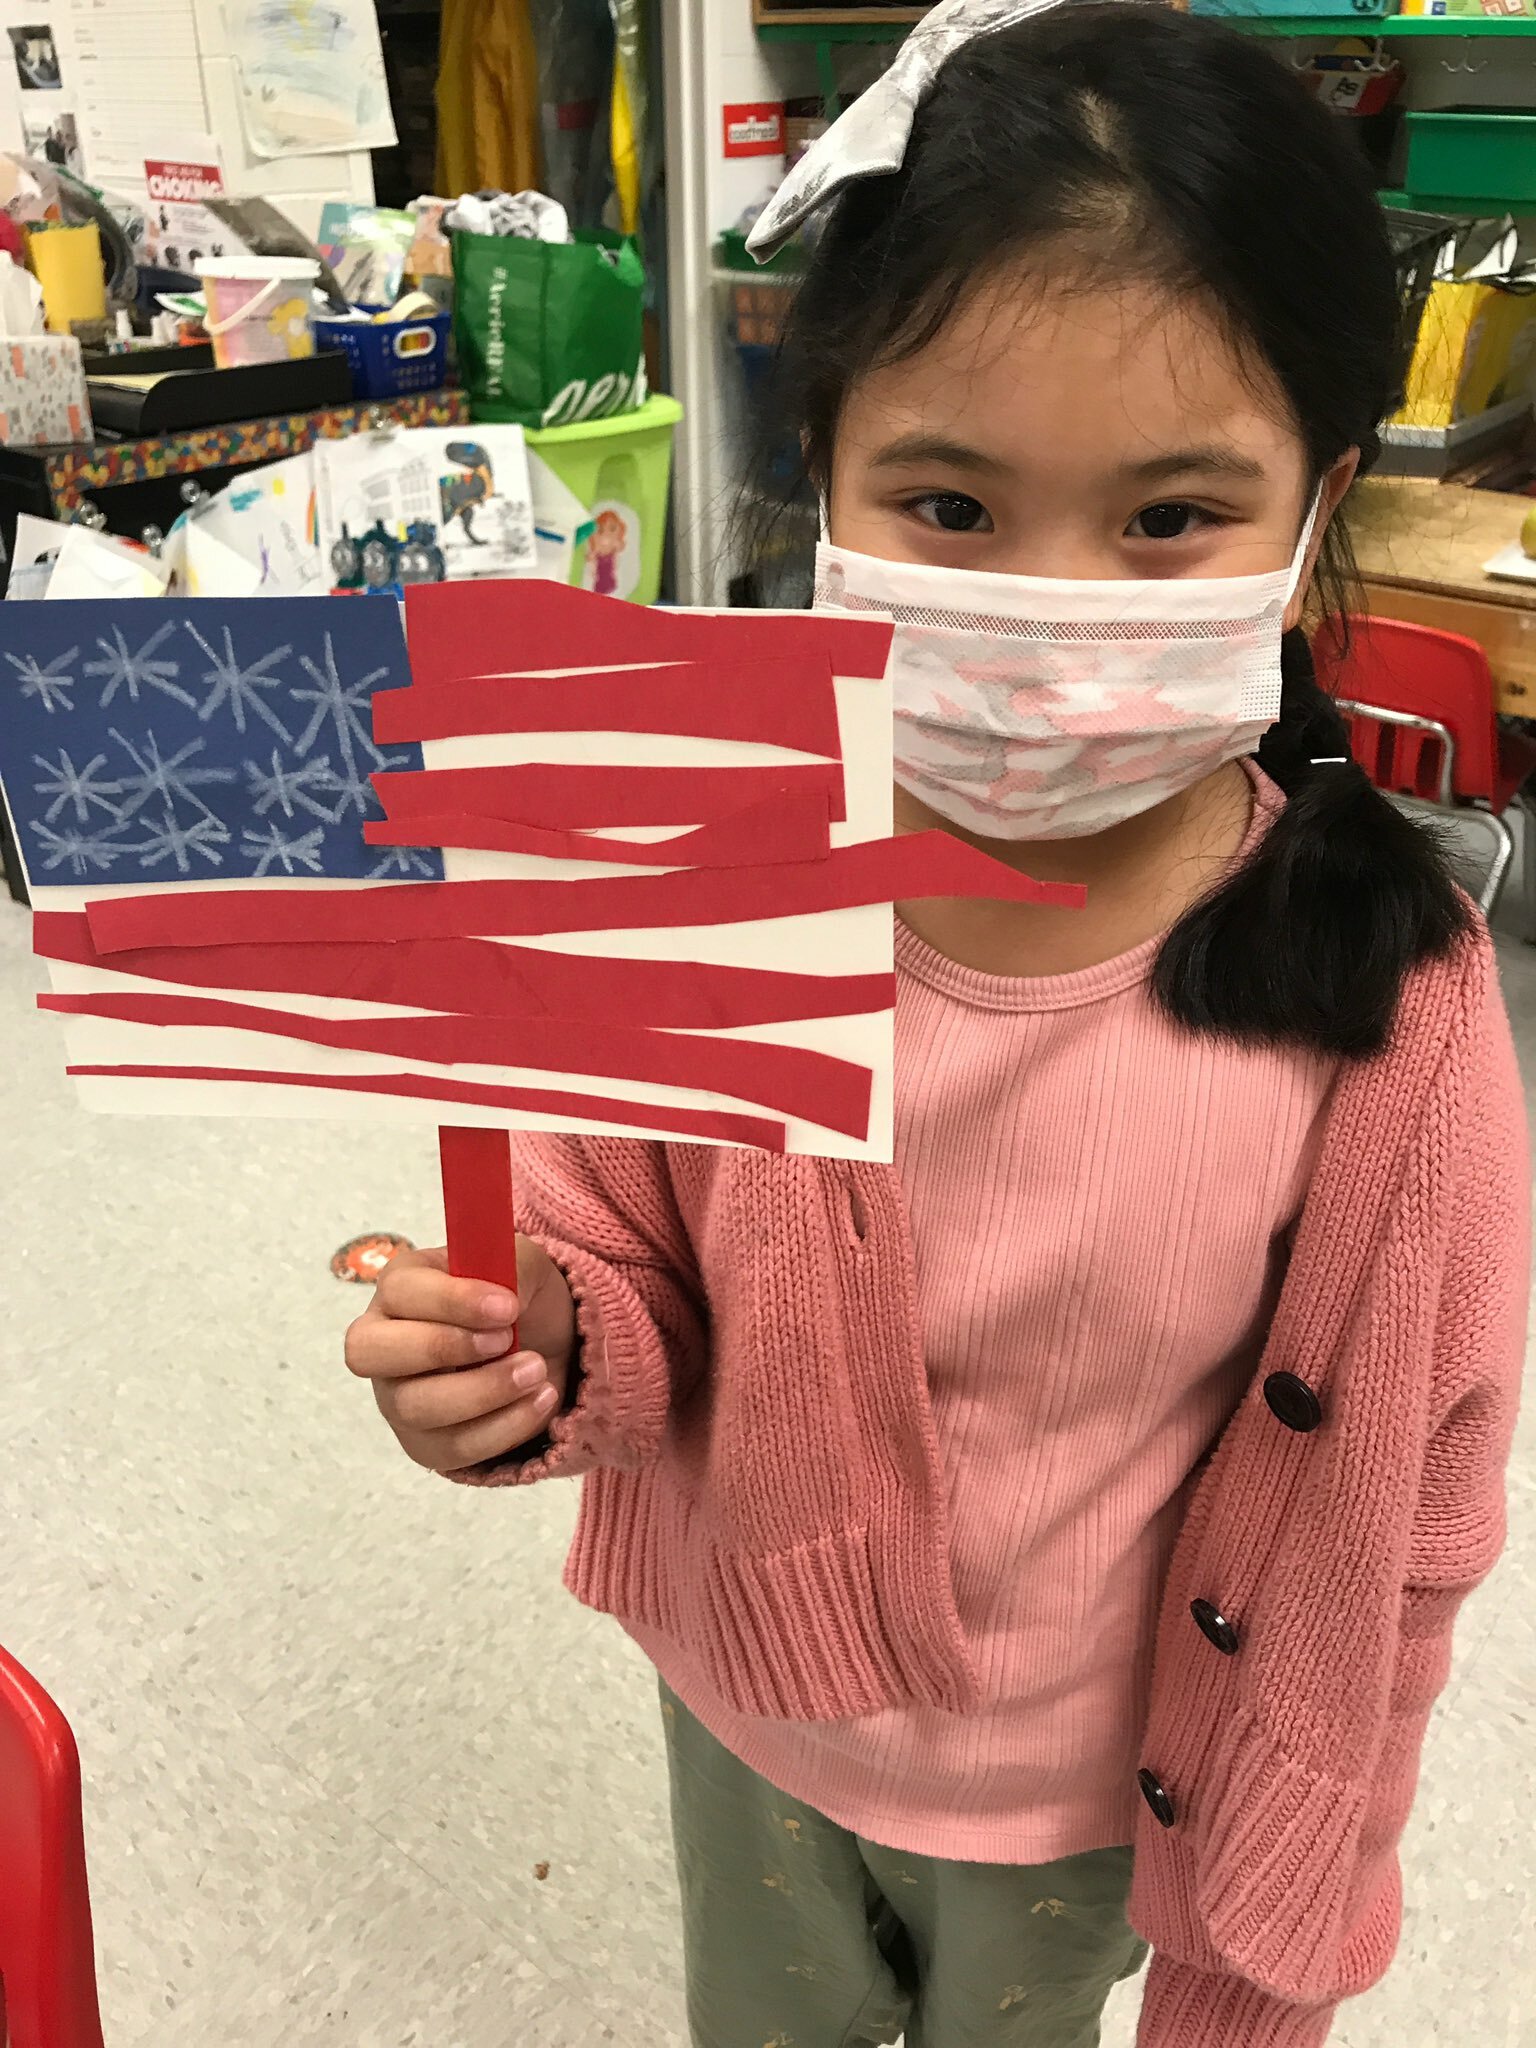 Hampton Bays Elementary School students celebrated Flag Day on June 14 with a variety of activities. Kindergartners in June Eaton’s class, for example, learned more about the American flag and created their own paper flags.